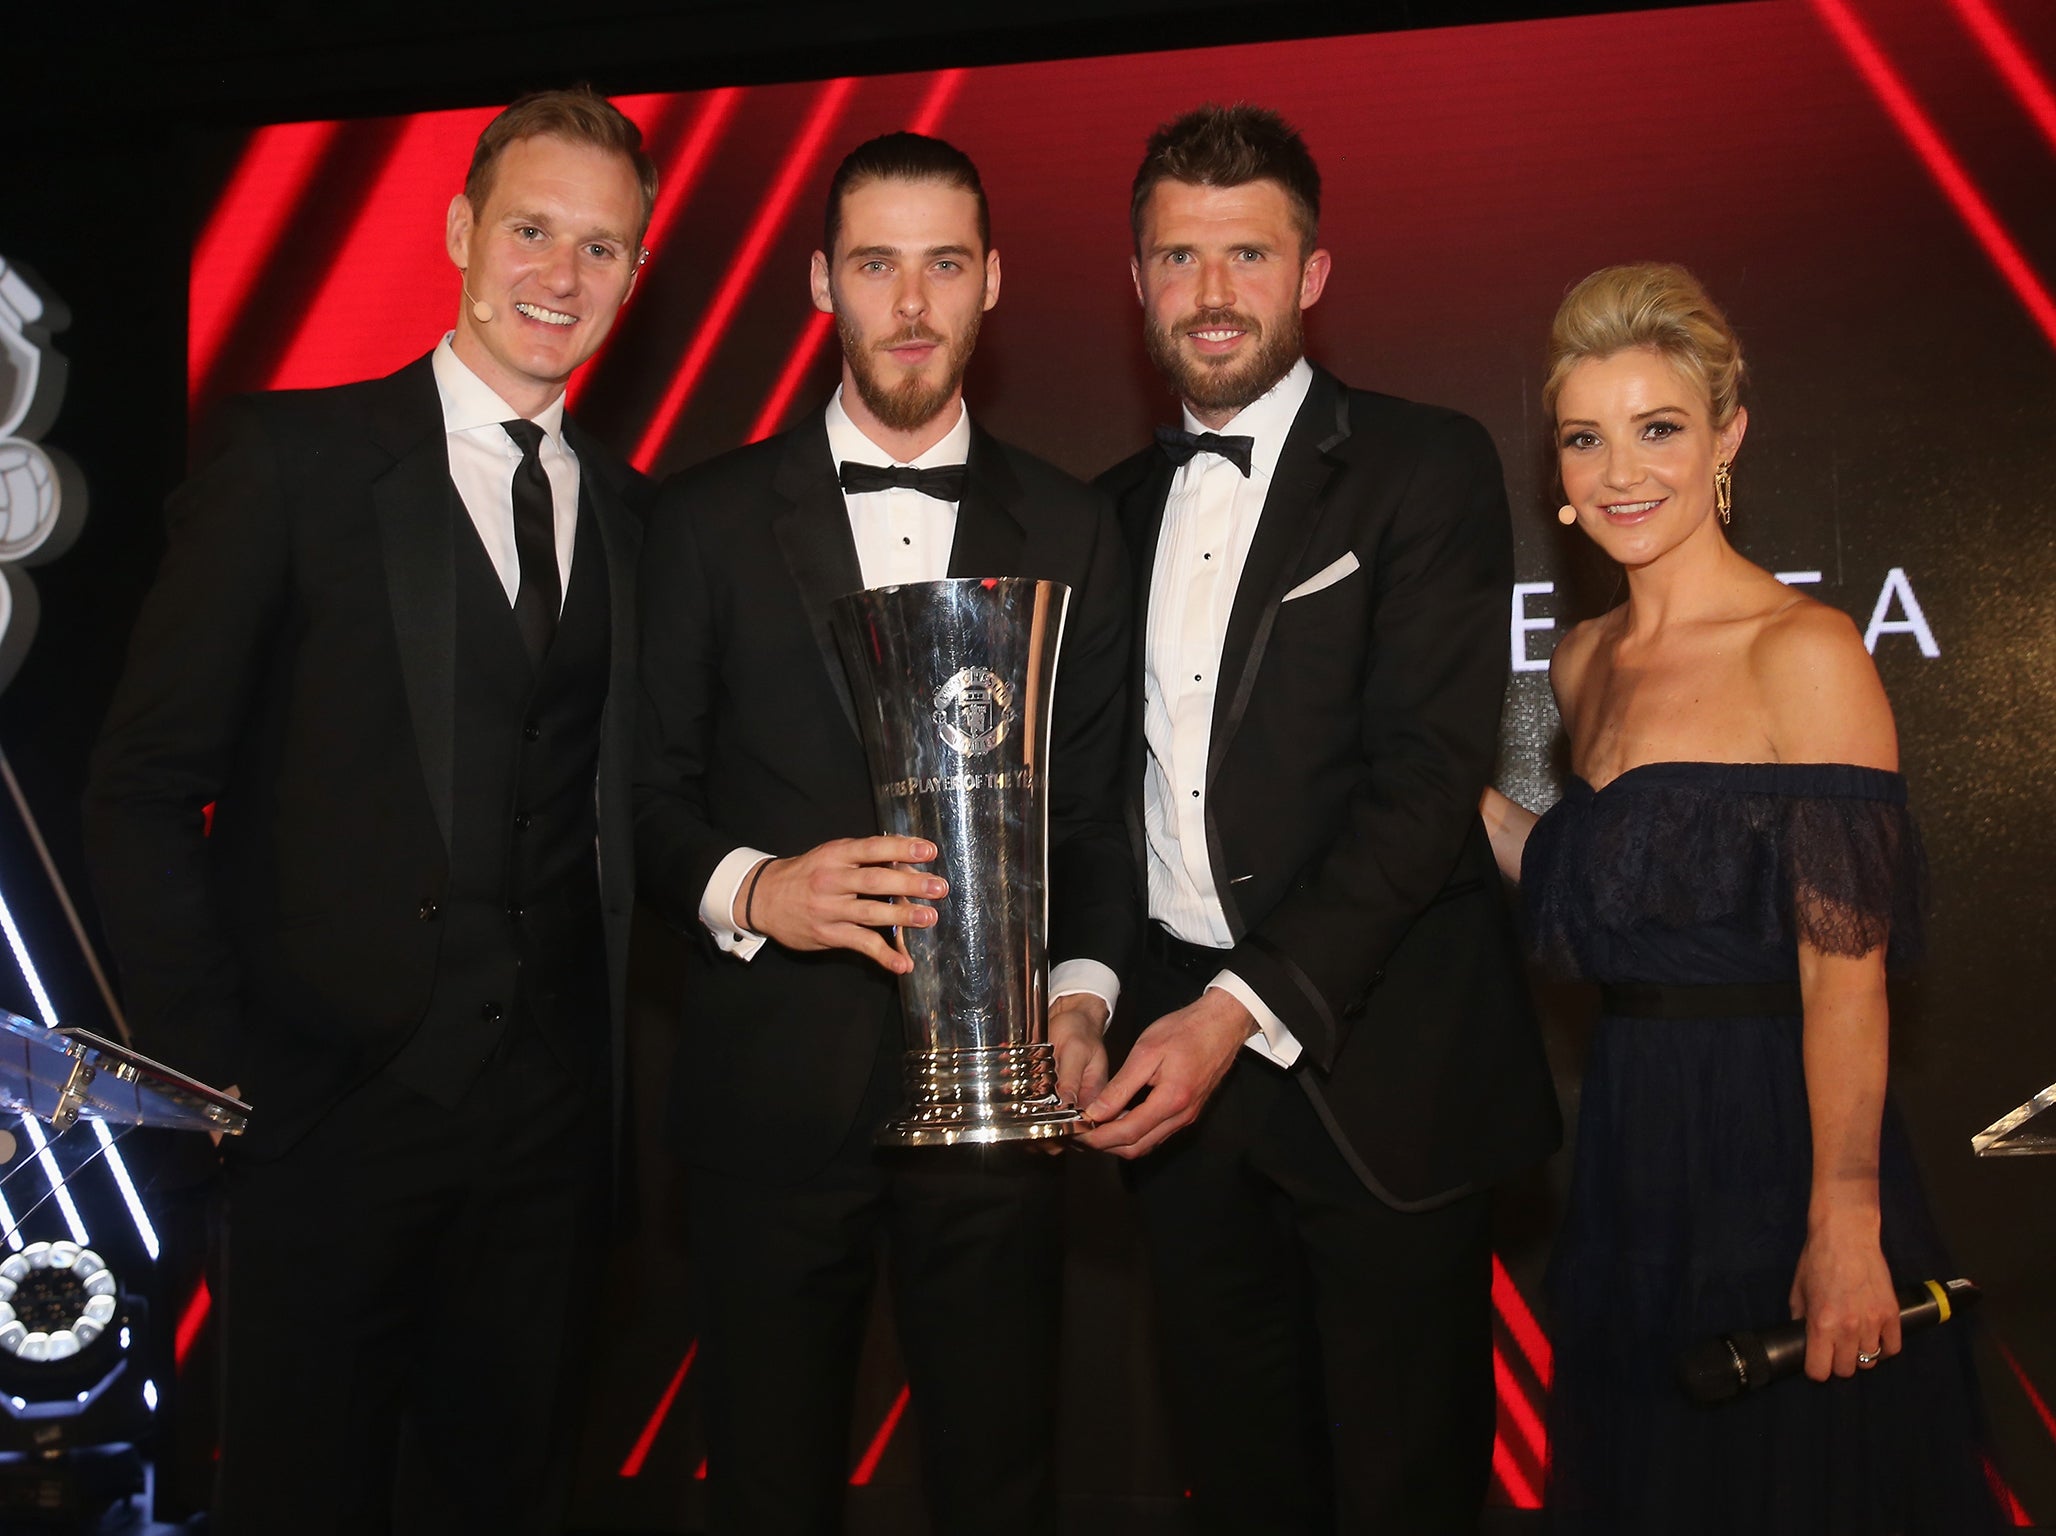 David de Gea collecting his trophy from team-mate Michael Carrick